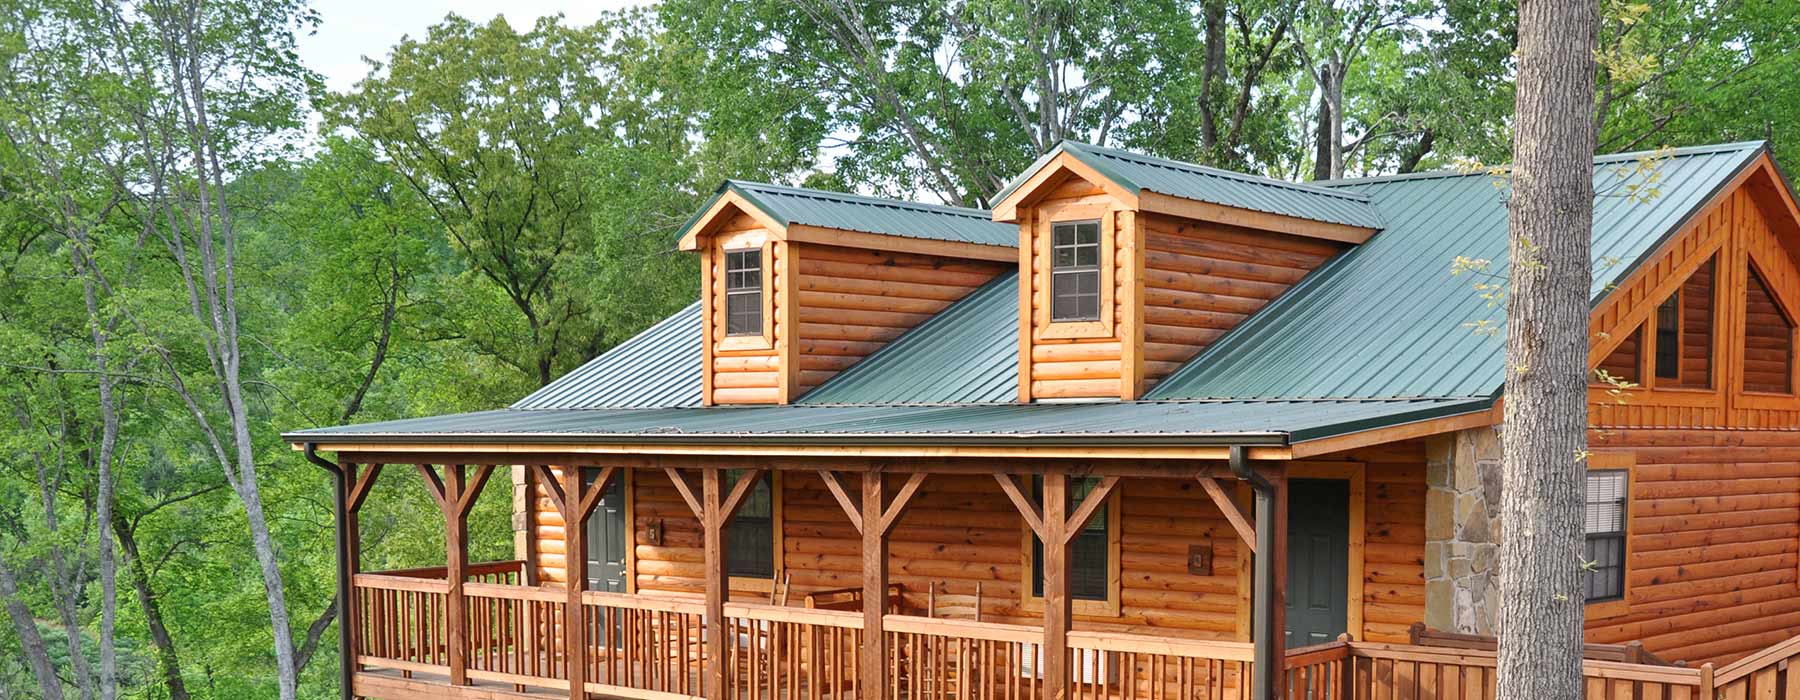 Cabins for Sale in Blowing Rock NC